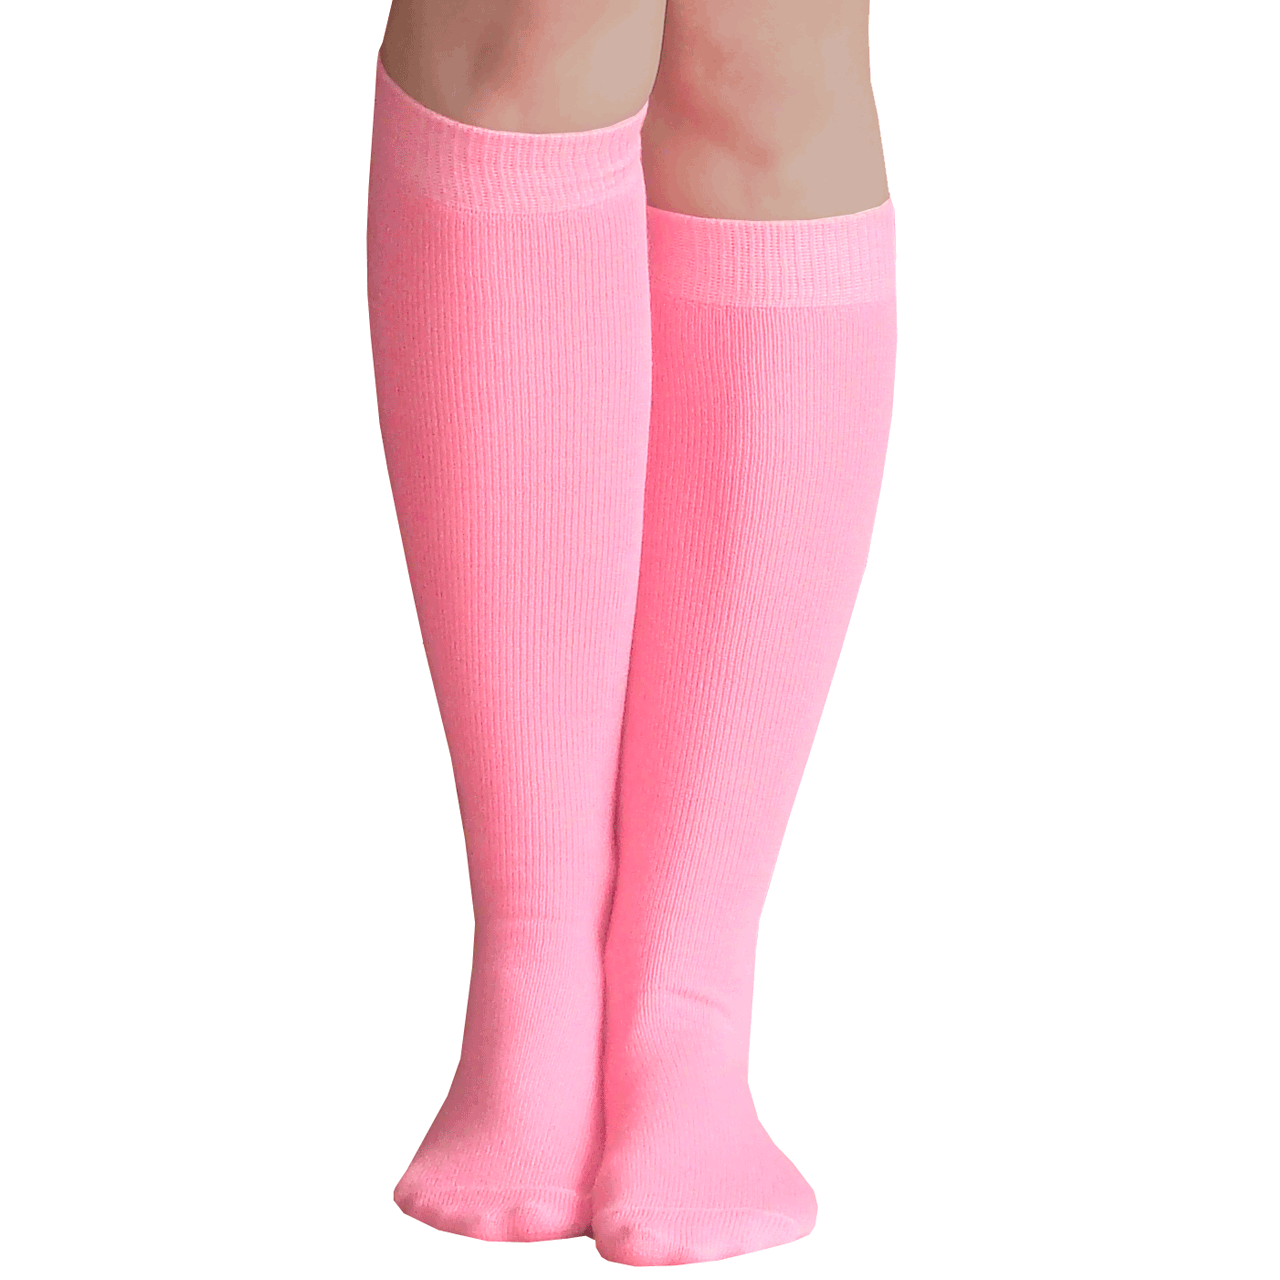 Thin Solid Pink Knee Highs